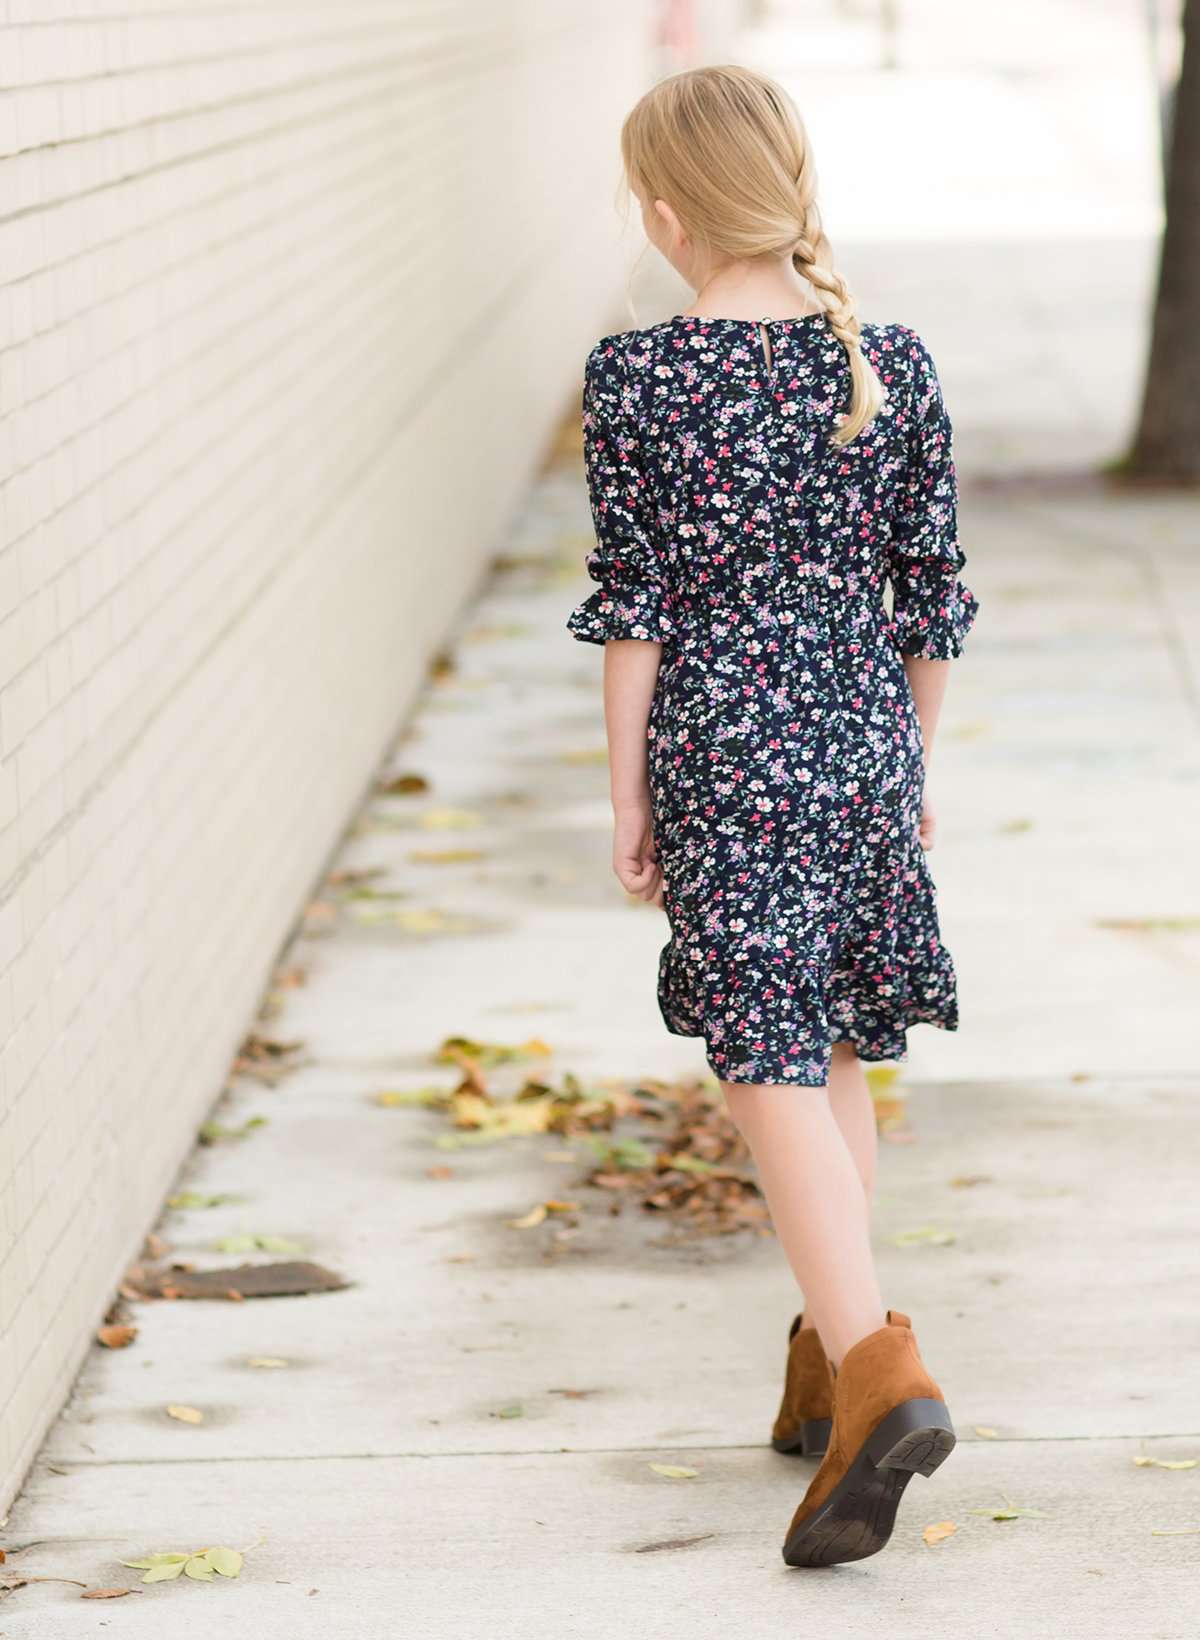 Modest girls and conservative teens navy and floral below the knee midi dress